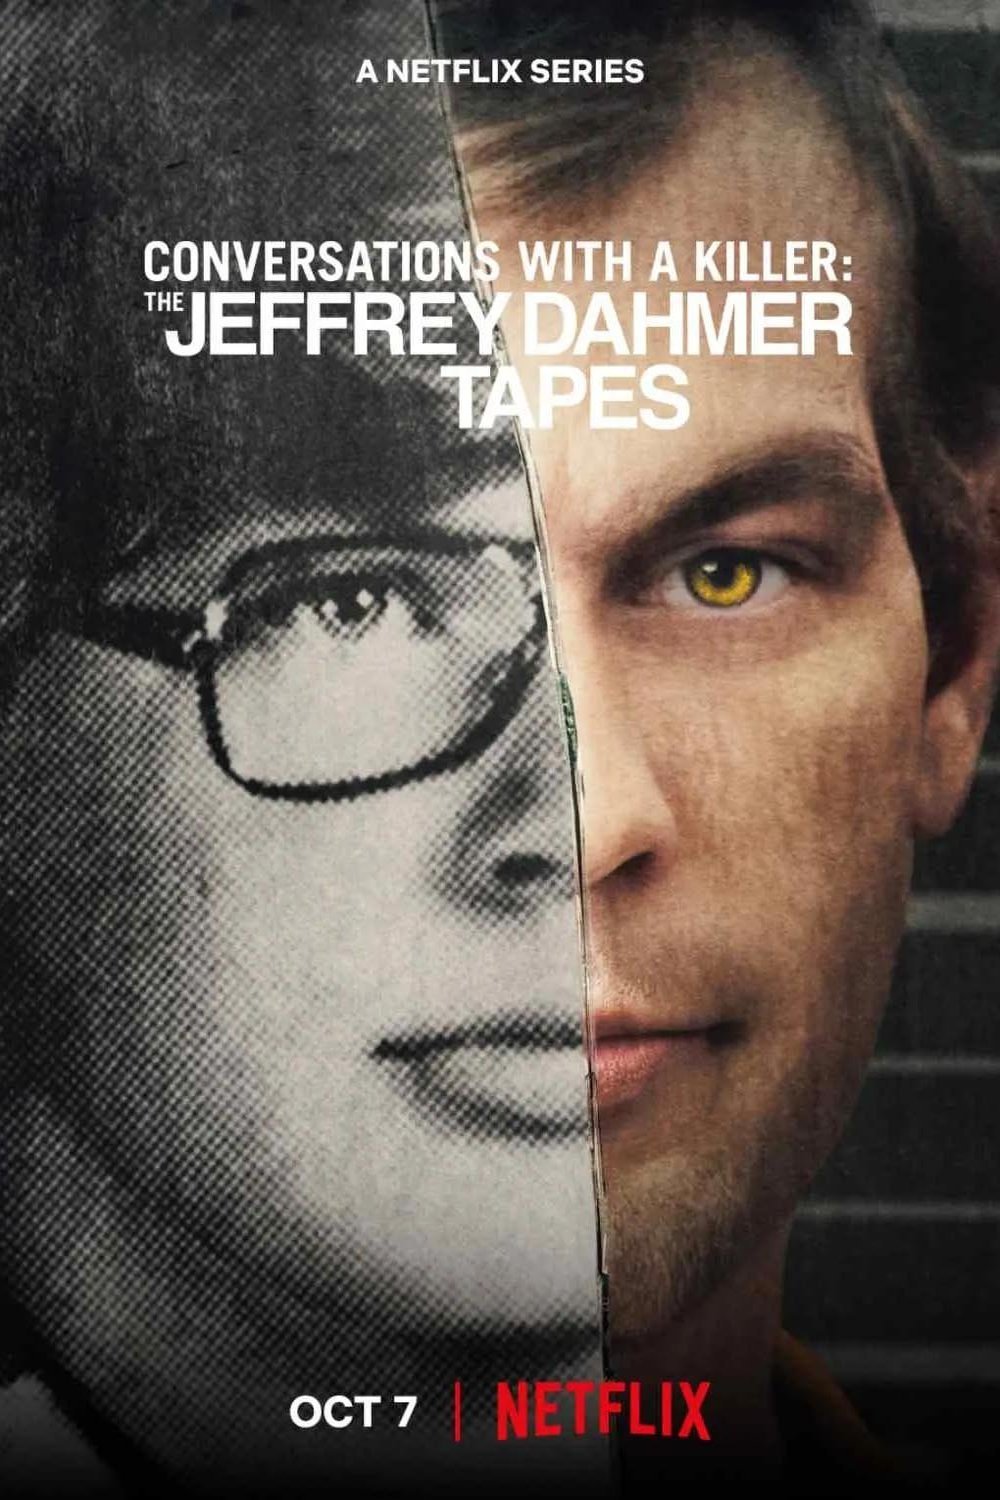 Poster of the movie Conversations with a Killer: The Jeffrey Dahmer Tapes